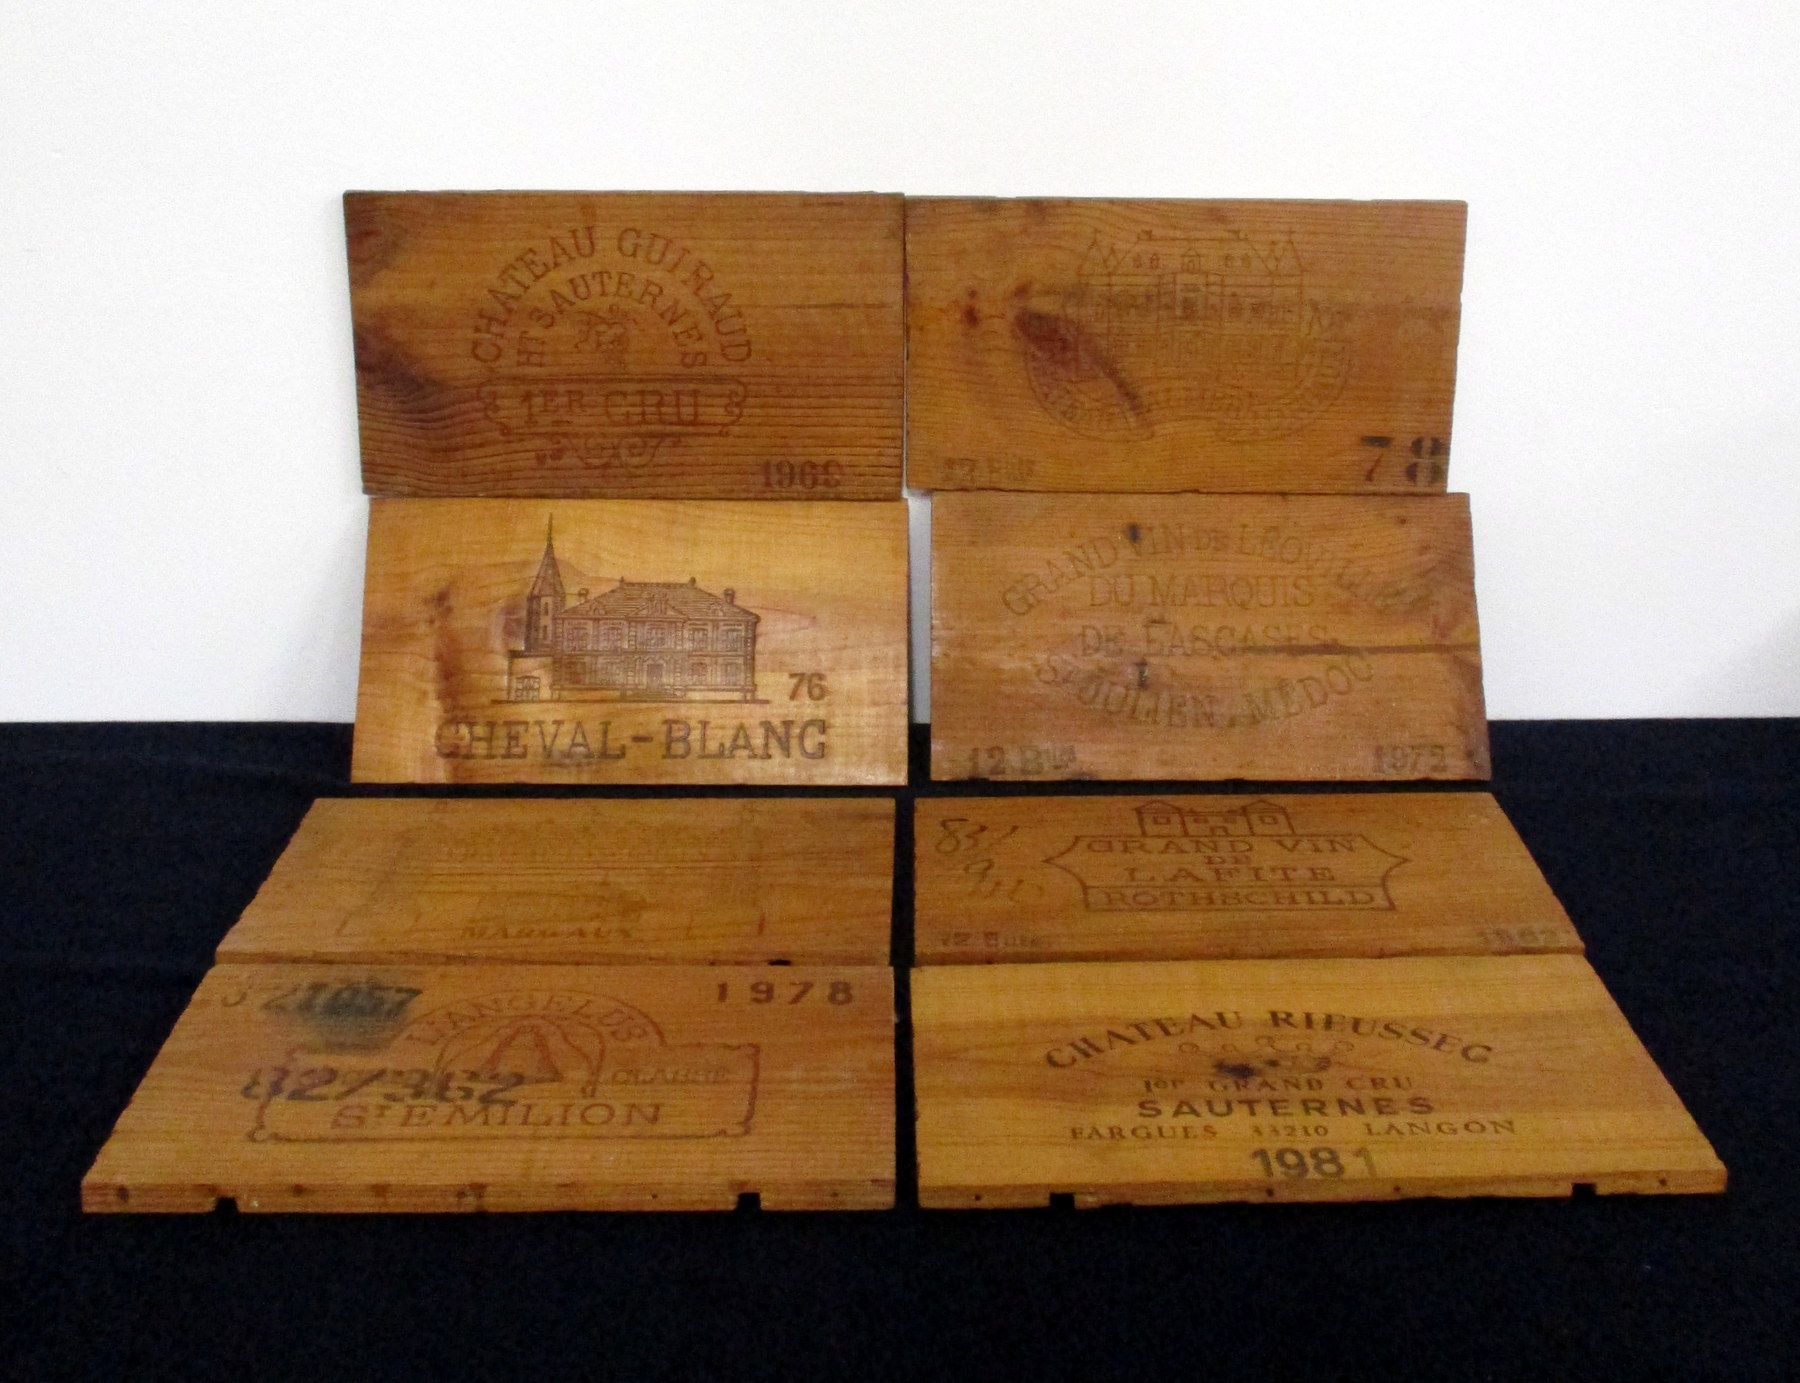 A collection of 8 Polished Wooden Box Ends including:- Ch. Lafite Rothschild 1982, Ch. Palmer